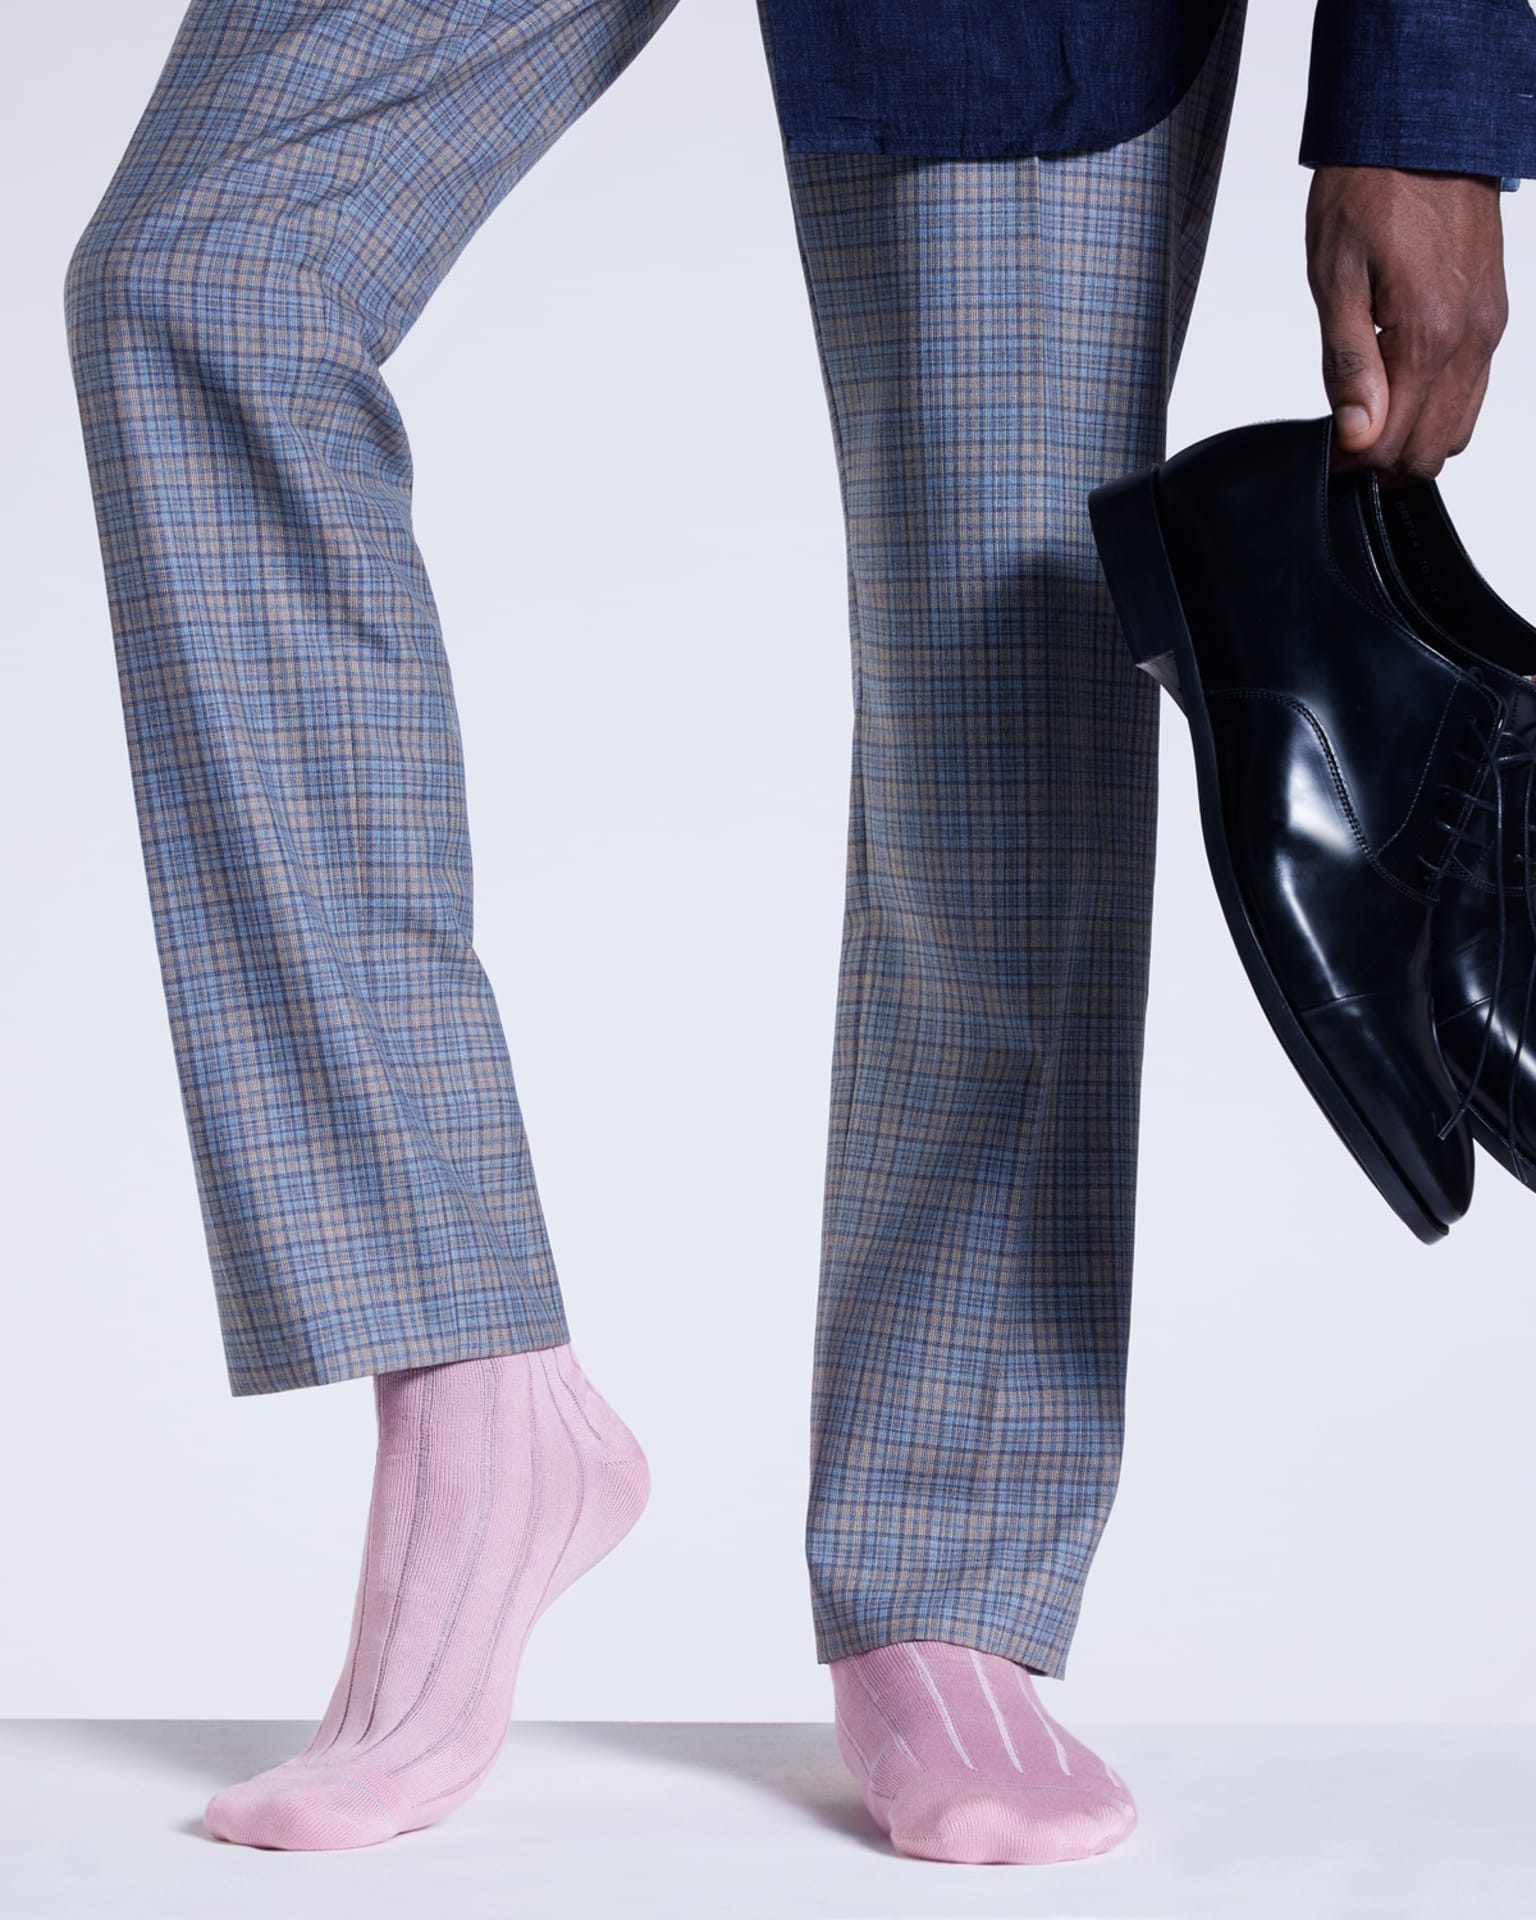 a male models legs wearing pink socks, checked trousers and a blue shirt holding a pair of black oxford shoes